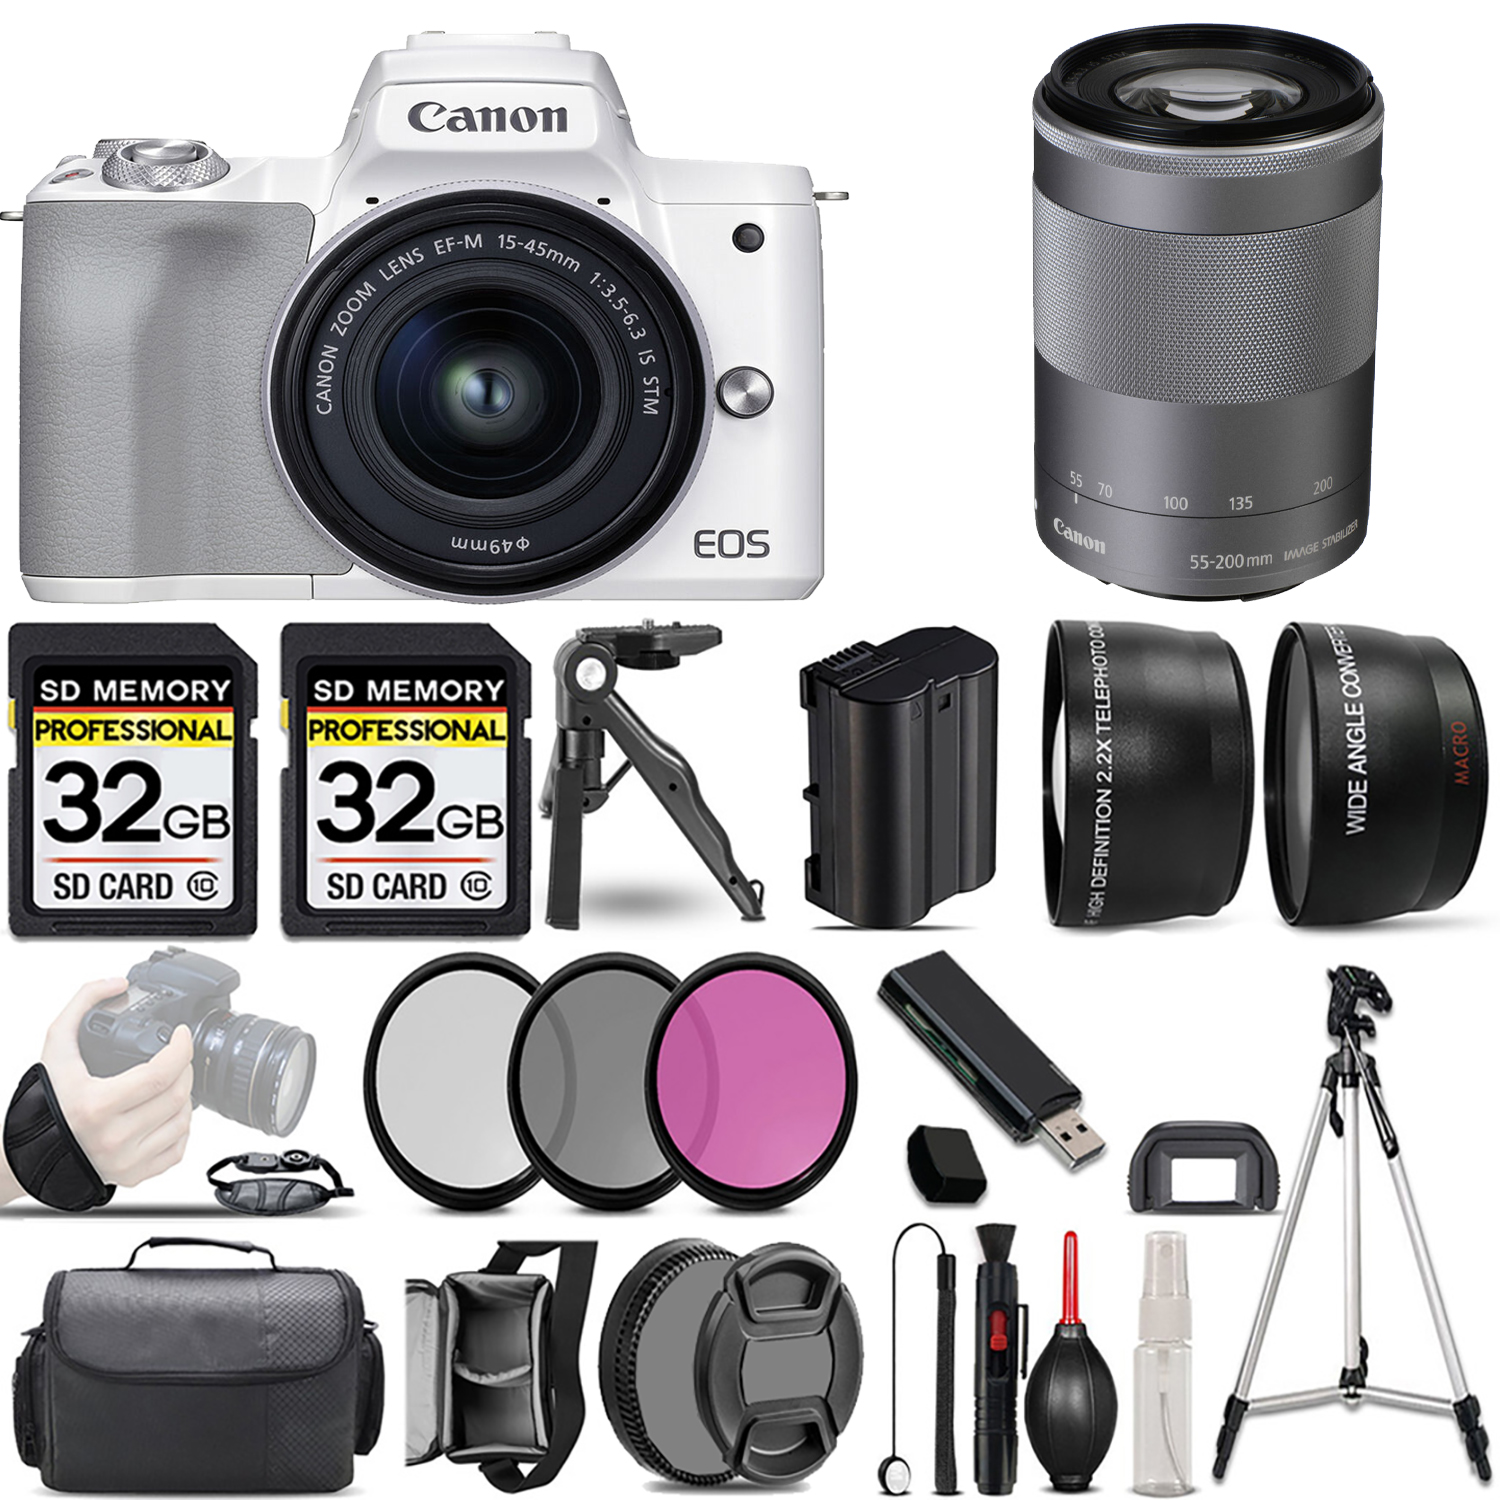 M50 II + 15-45mm Lens (White) + 55-200mm IS Lens (Silver) + 3 Piece Filter Set + 64GB *FREE SHIPPING*